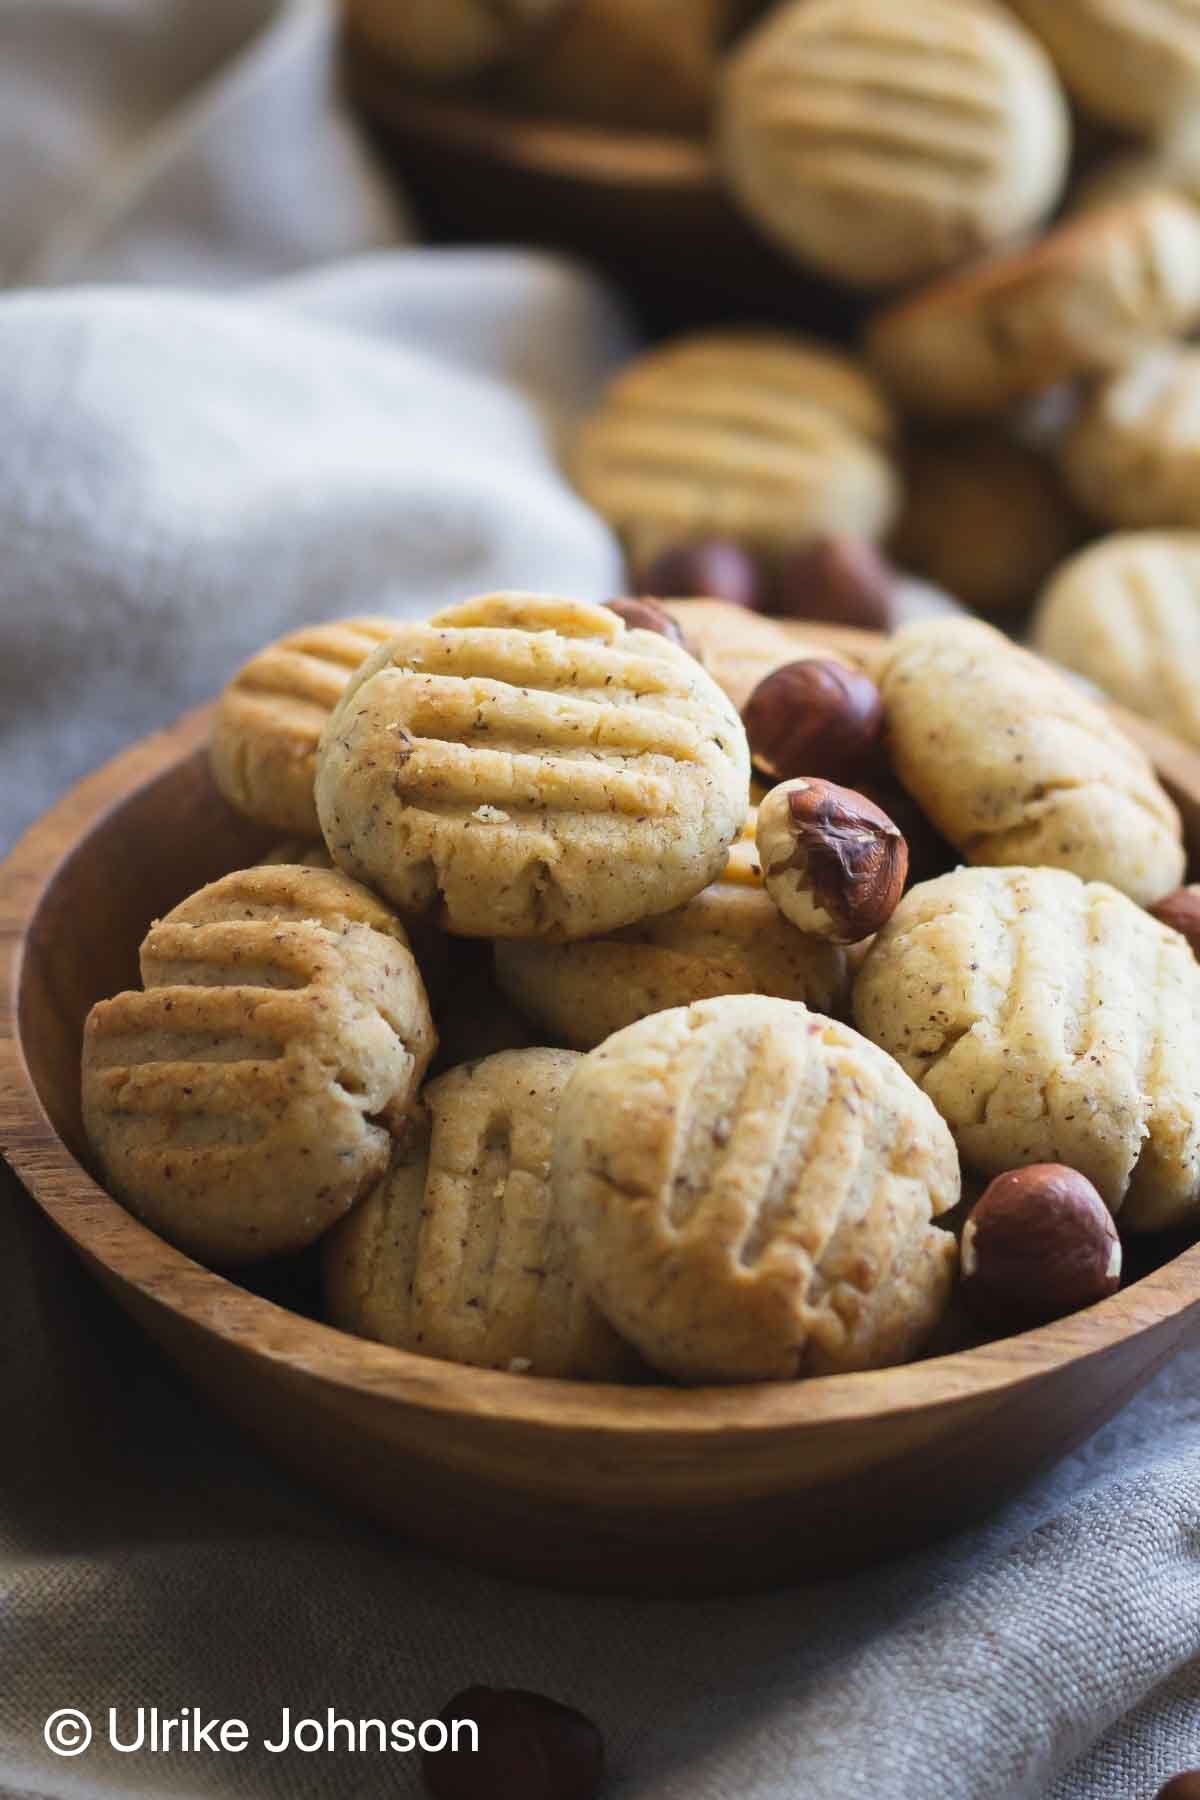 Soft German Hazelnut Cookies with whole hazelnuts in a wooden bowl